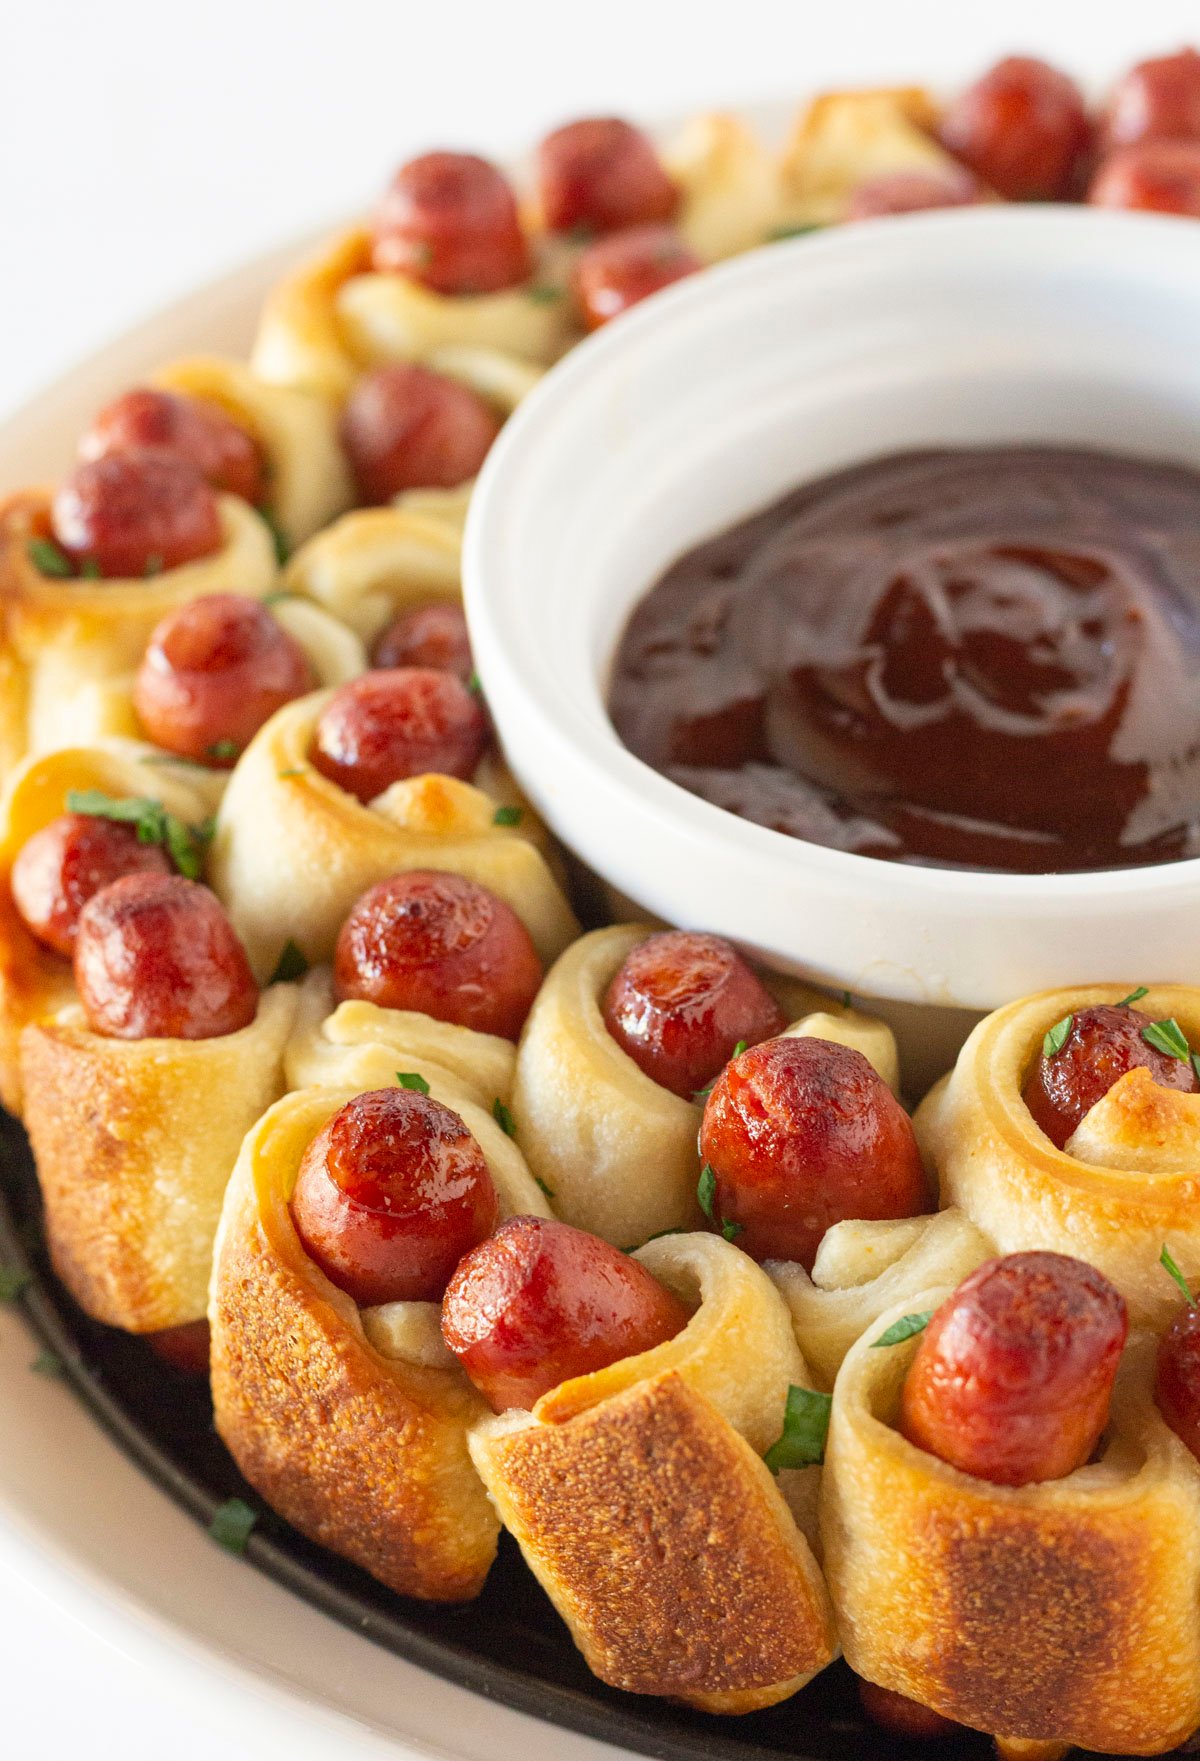 Pigs in a blanket baked into a wreath shape with a bowl of bbq sauce in the middle.